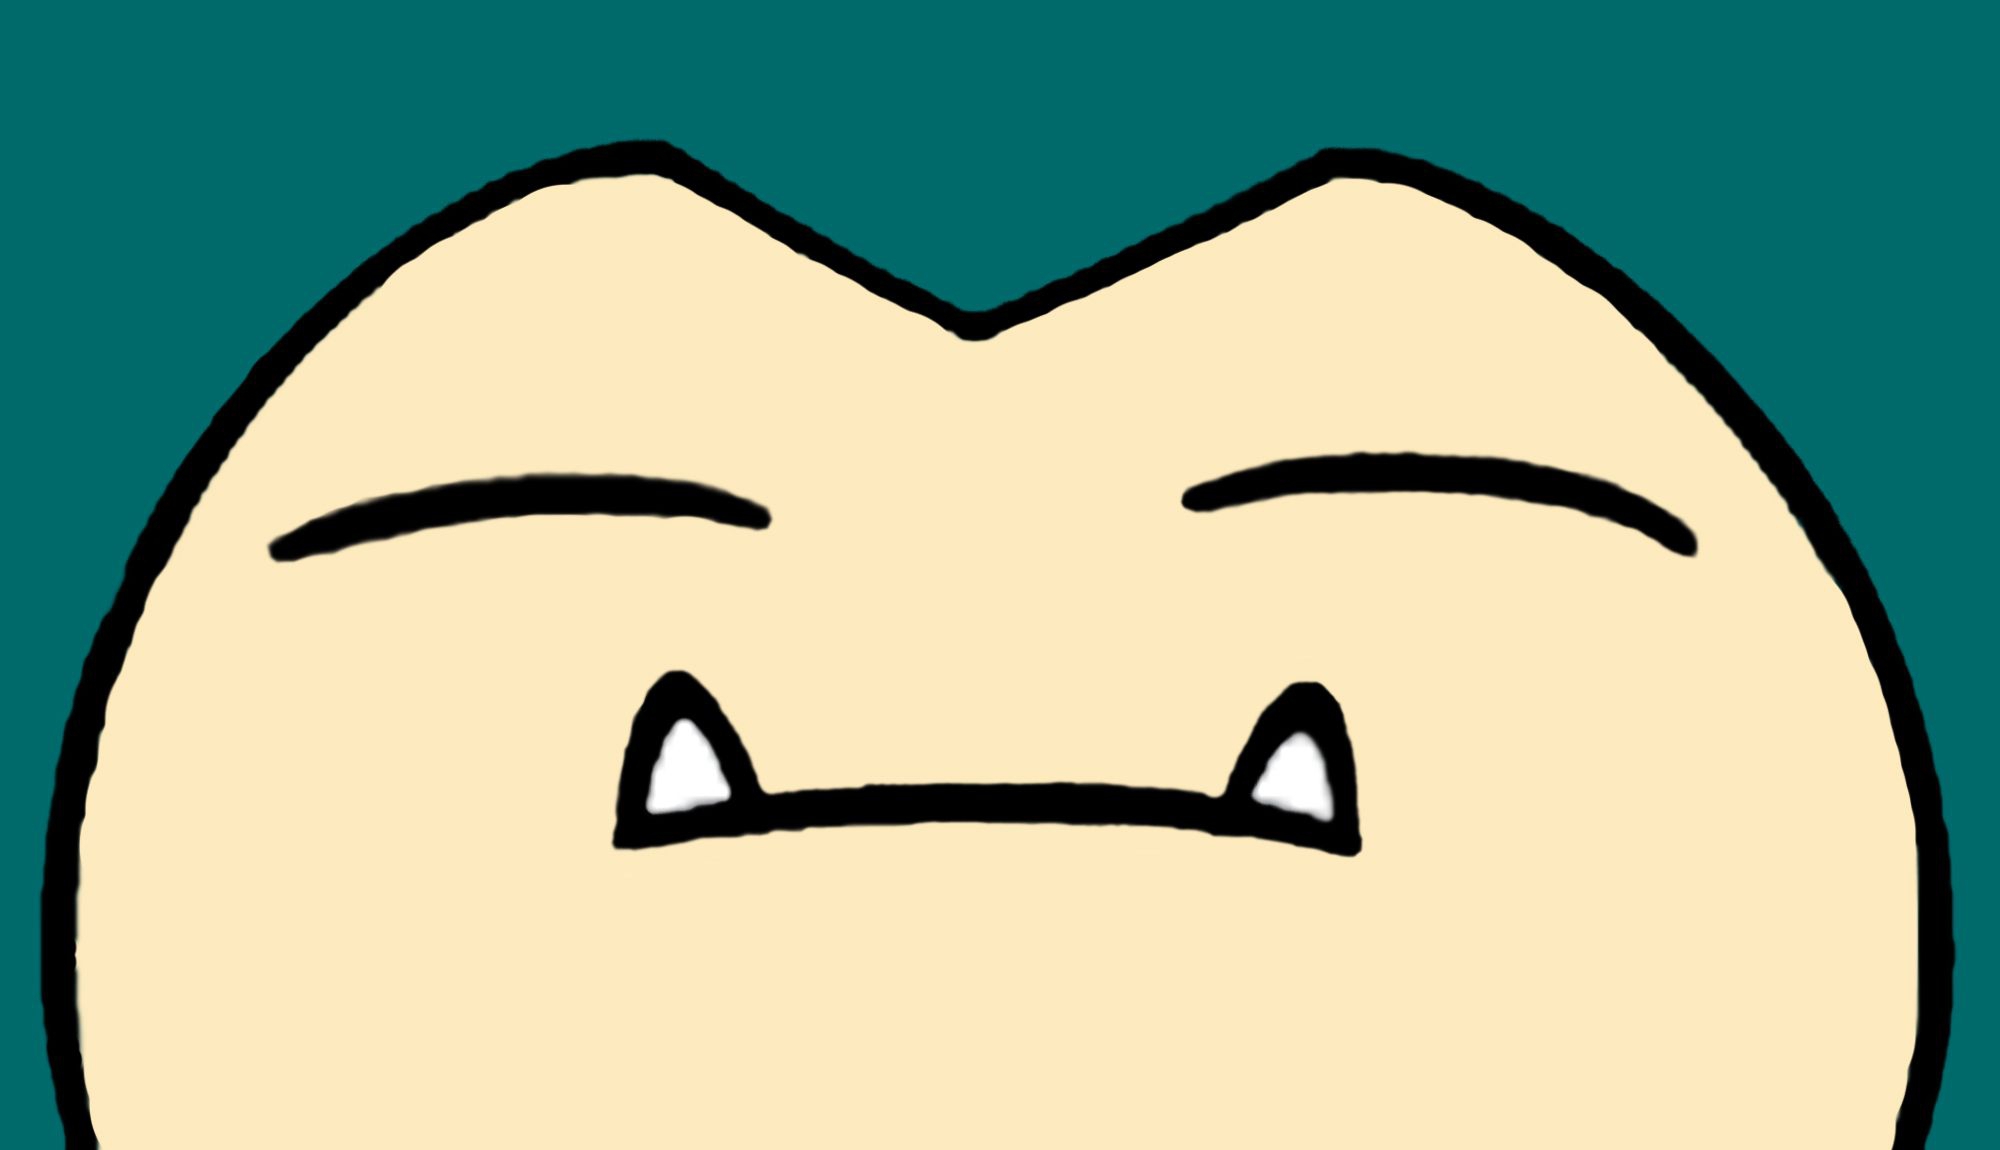 Snorlax Wallpaper Image Photos Pictures Background